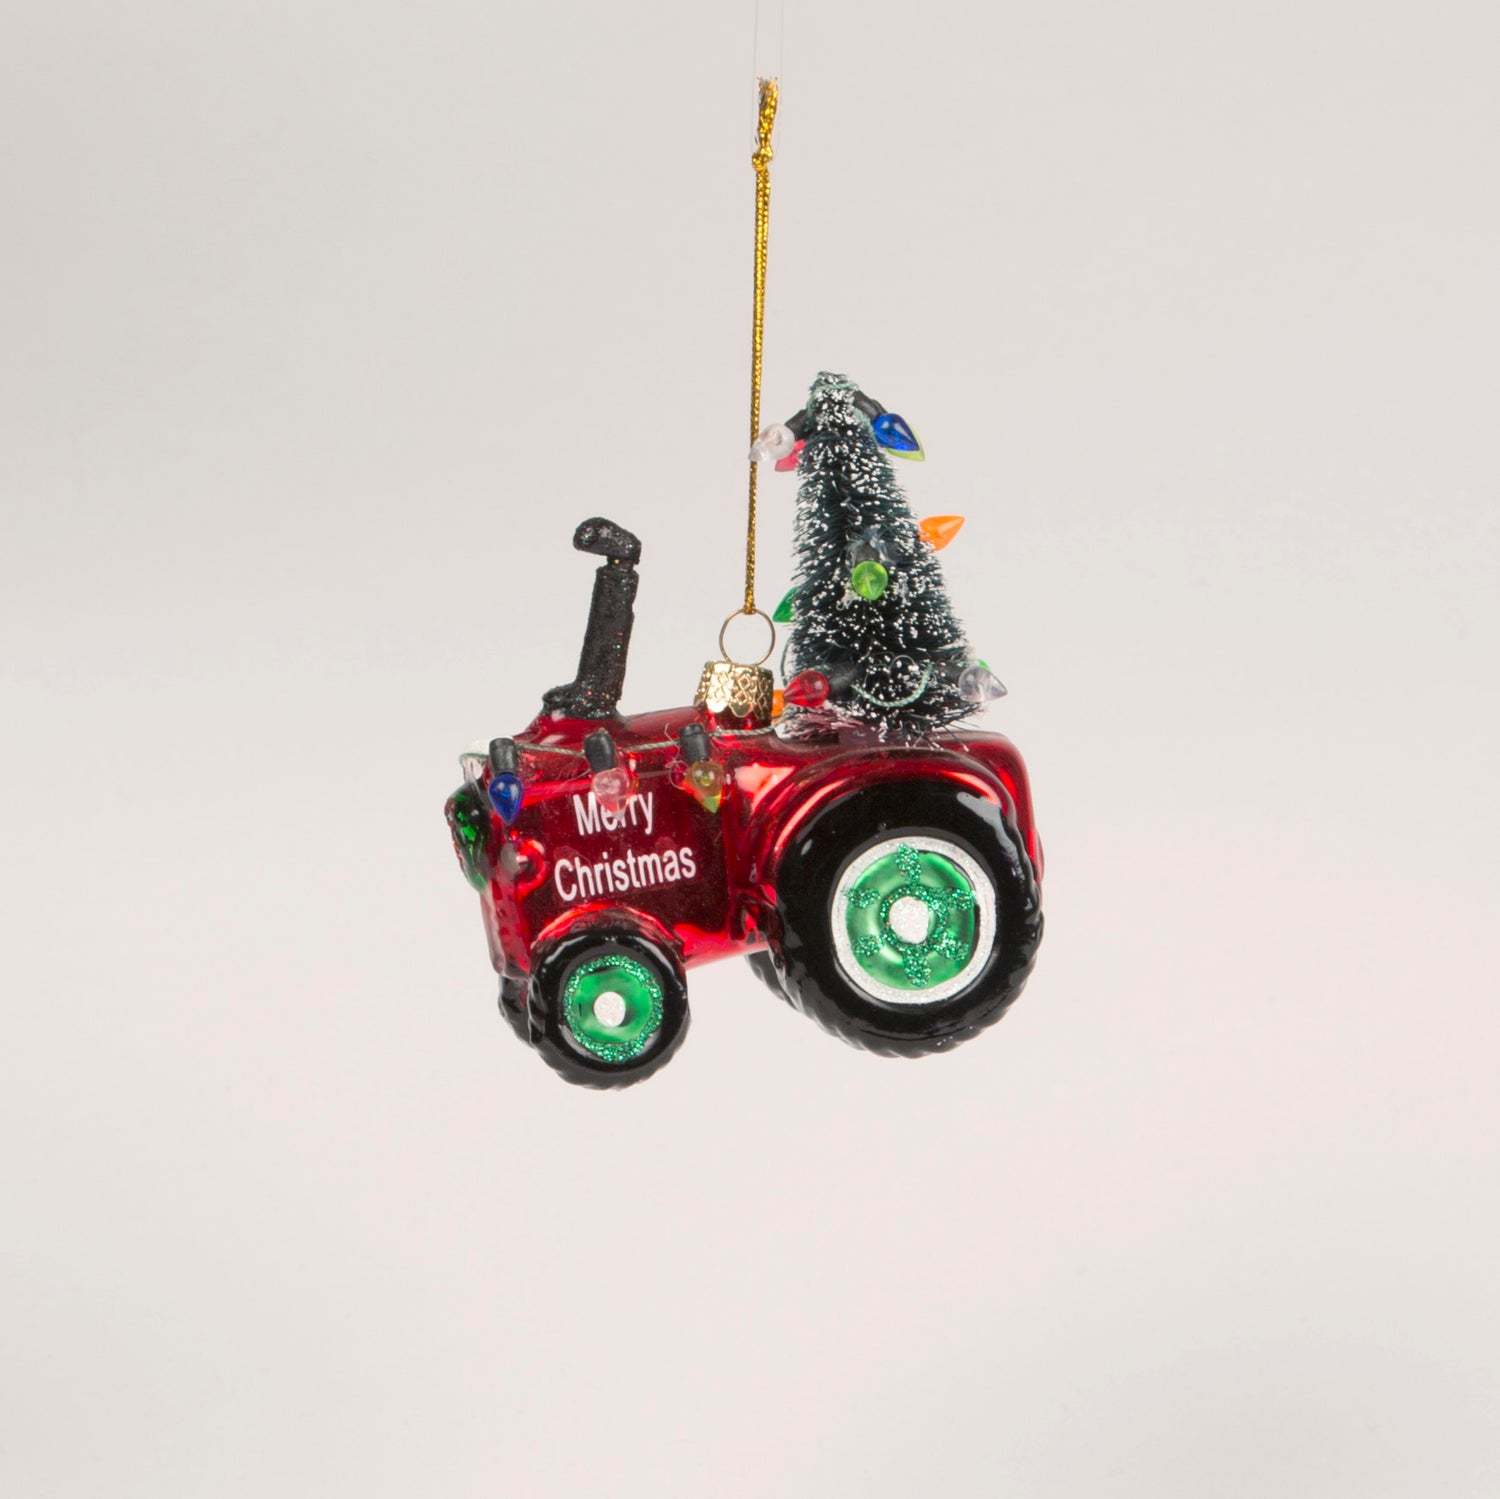 Red and green tractor with a Christmas Tree and lights, and 'Merry Christmas' written on the side.